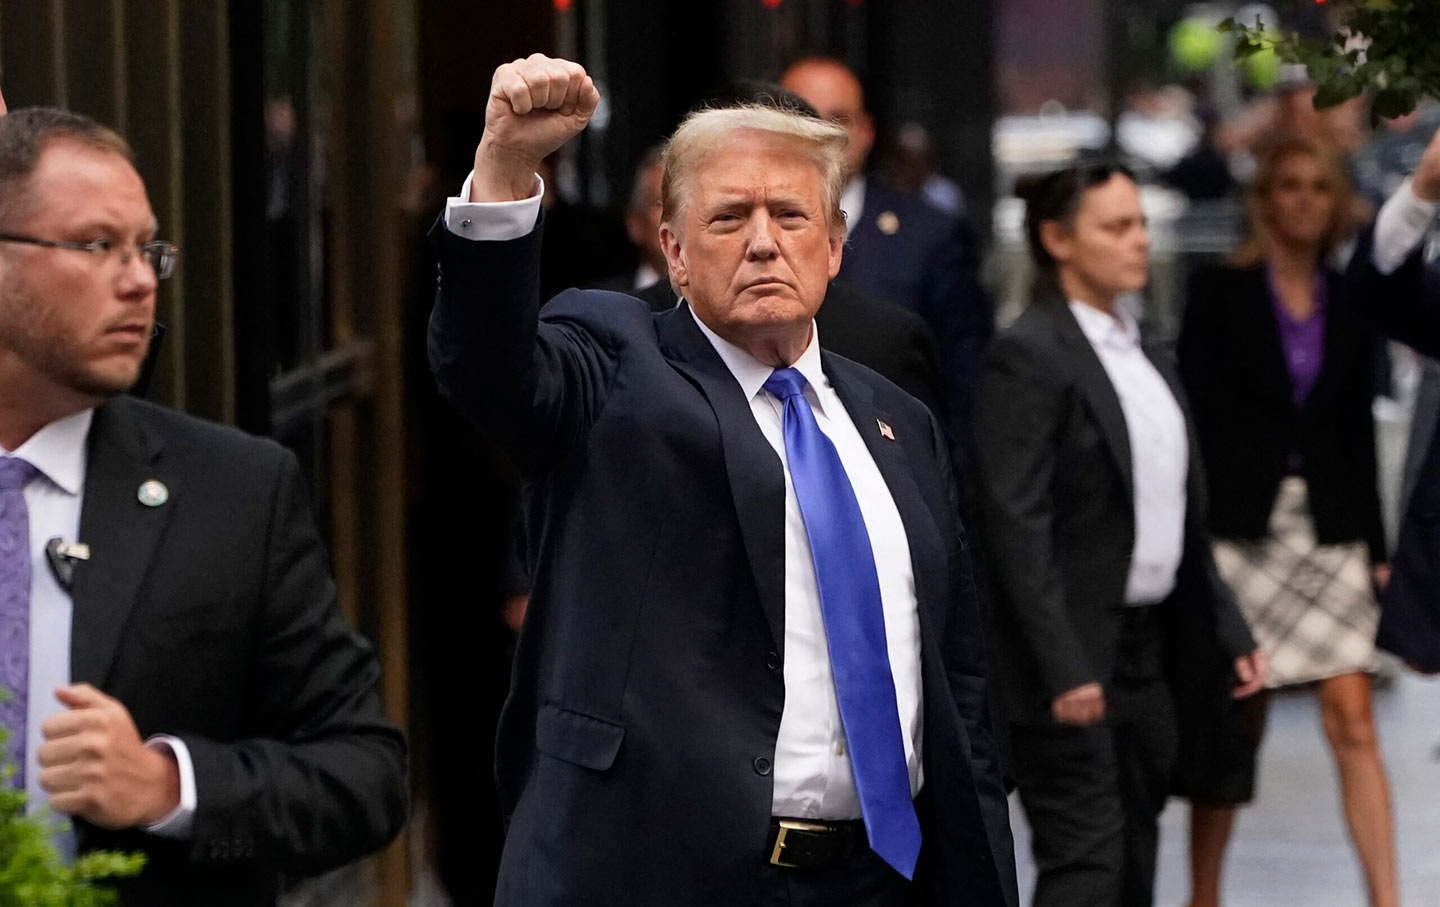 Donald Trump holds his fists outside Trump House after his conviction.